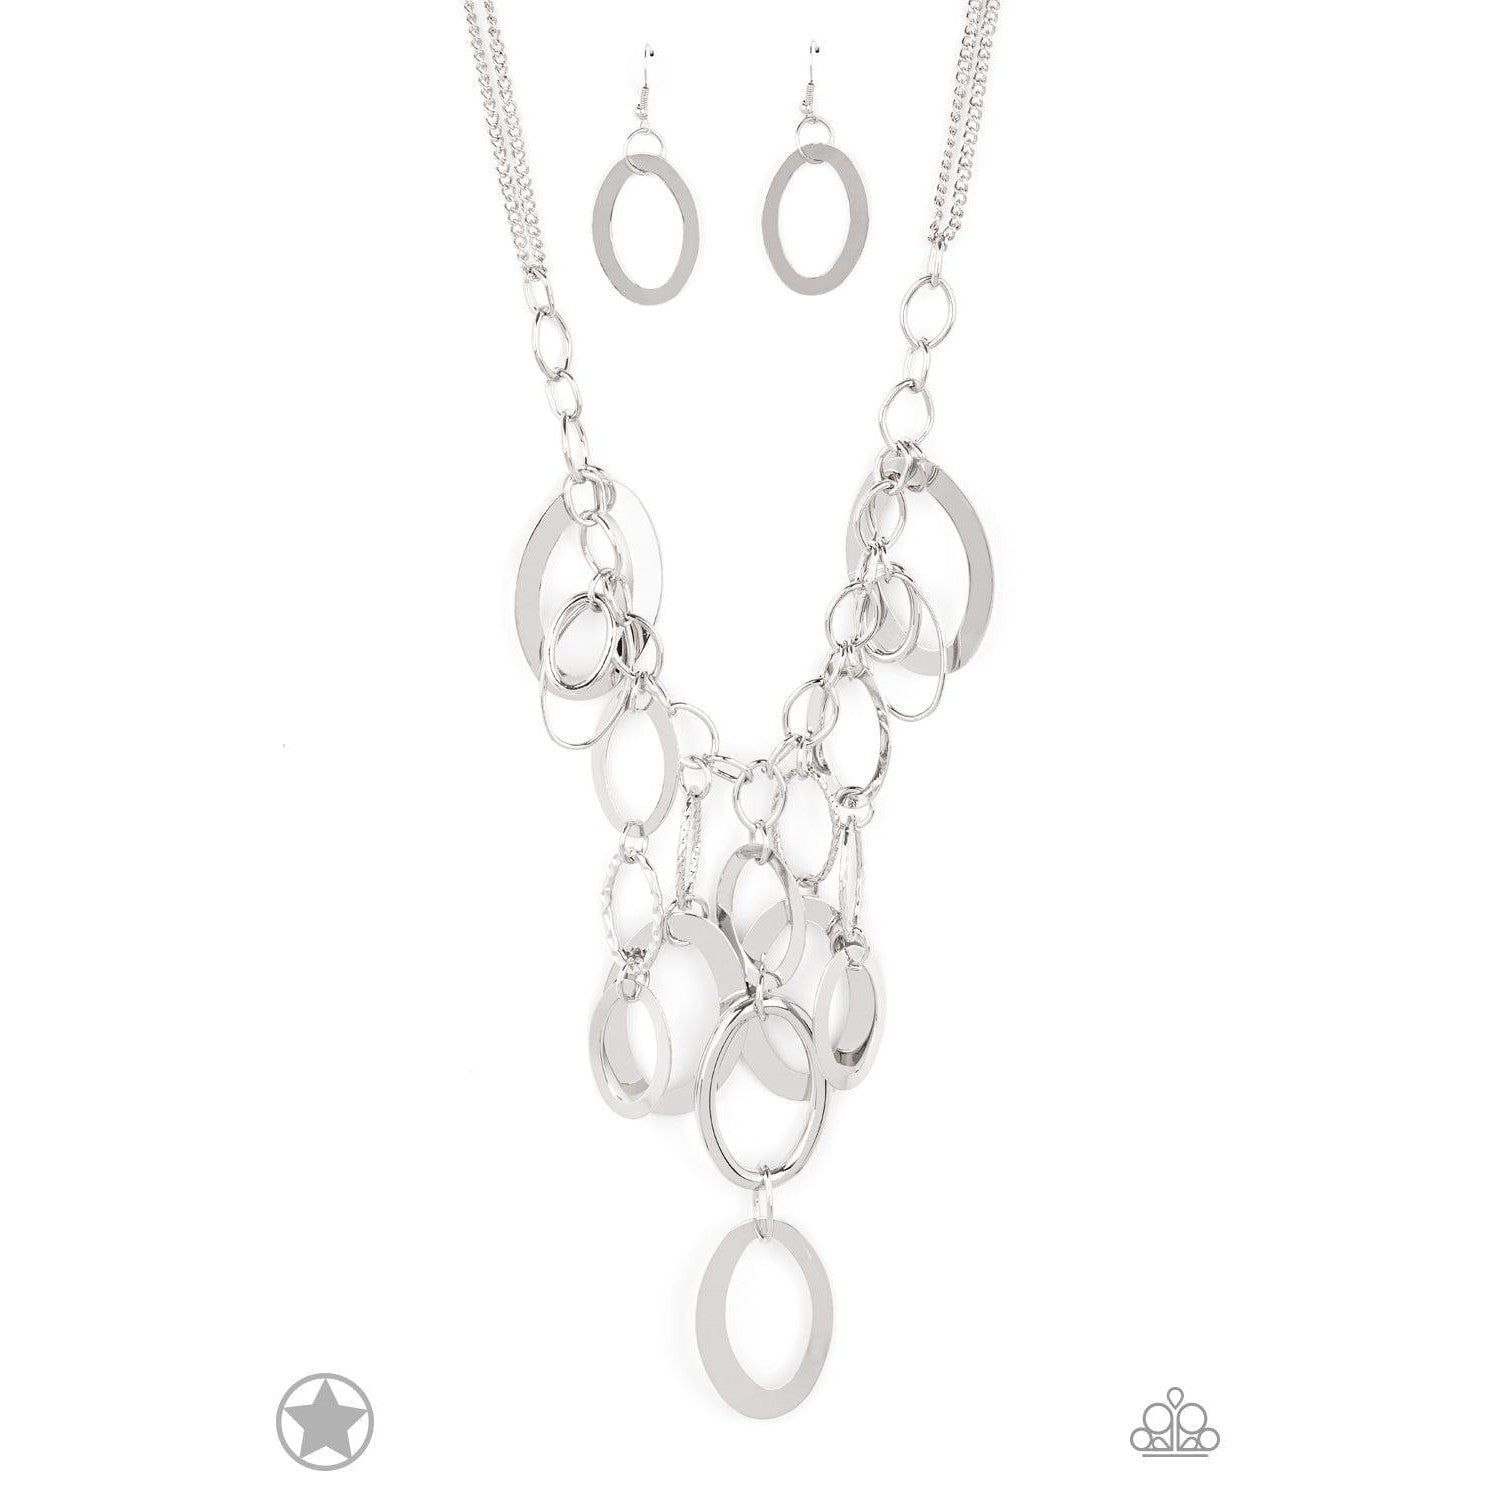 A Silver Spell - Silver Blockbuster Necklace - A Large Selection Hand-Chains And Jewelry On rainbowartsreview,Women's Jewelry | Necklaces, Earrings, Bracelets